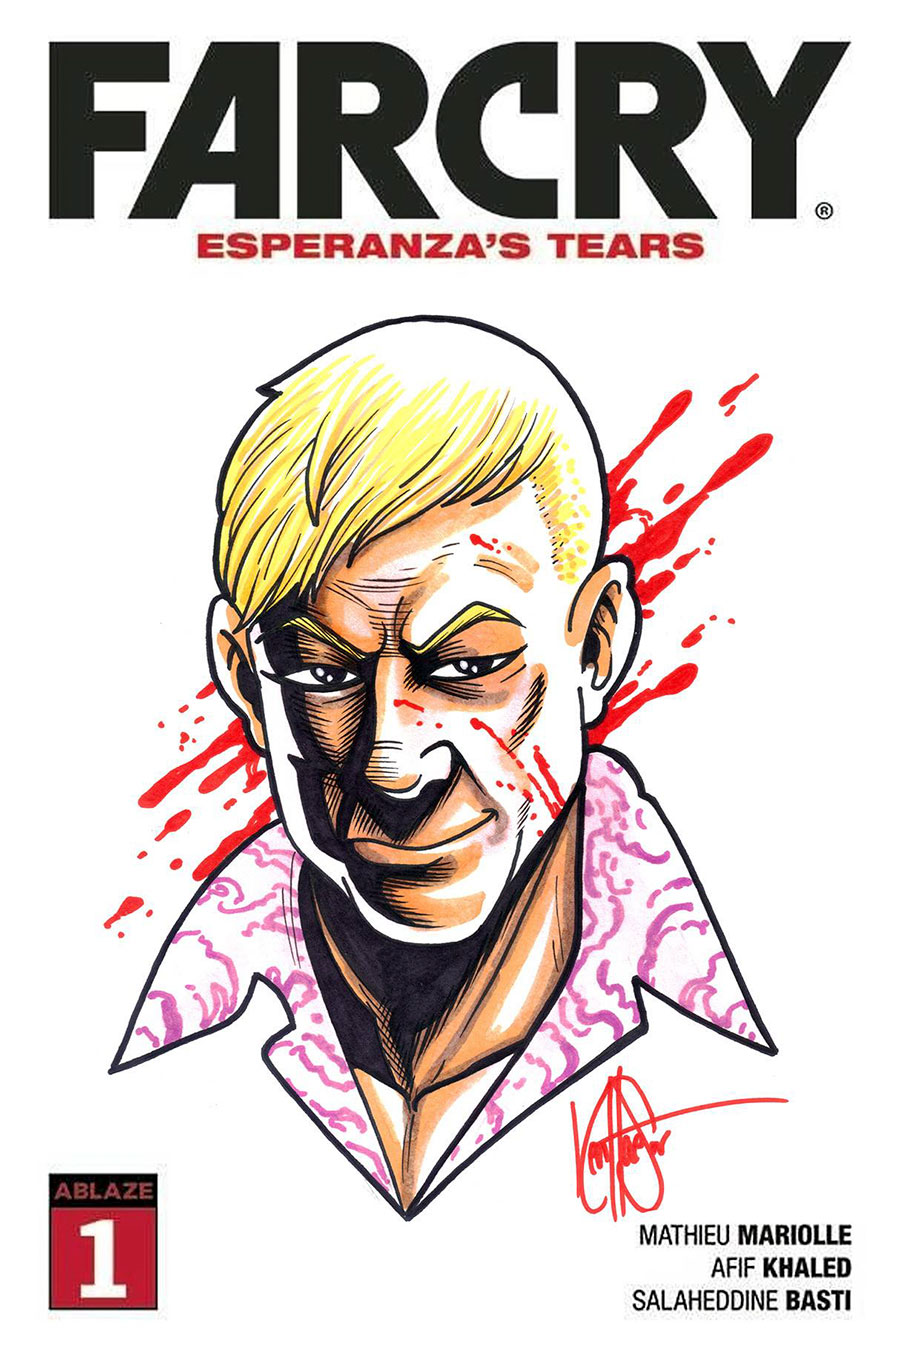 Far Cry Esperanzas Tears #1 Cover K DF Commissioned Cover Art Signed & Remarked By Ken Haeser With A Far Cry Character Hand-Drawn Sketch